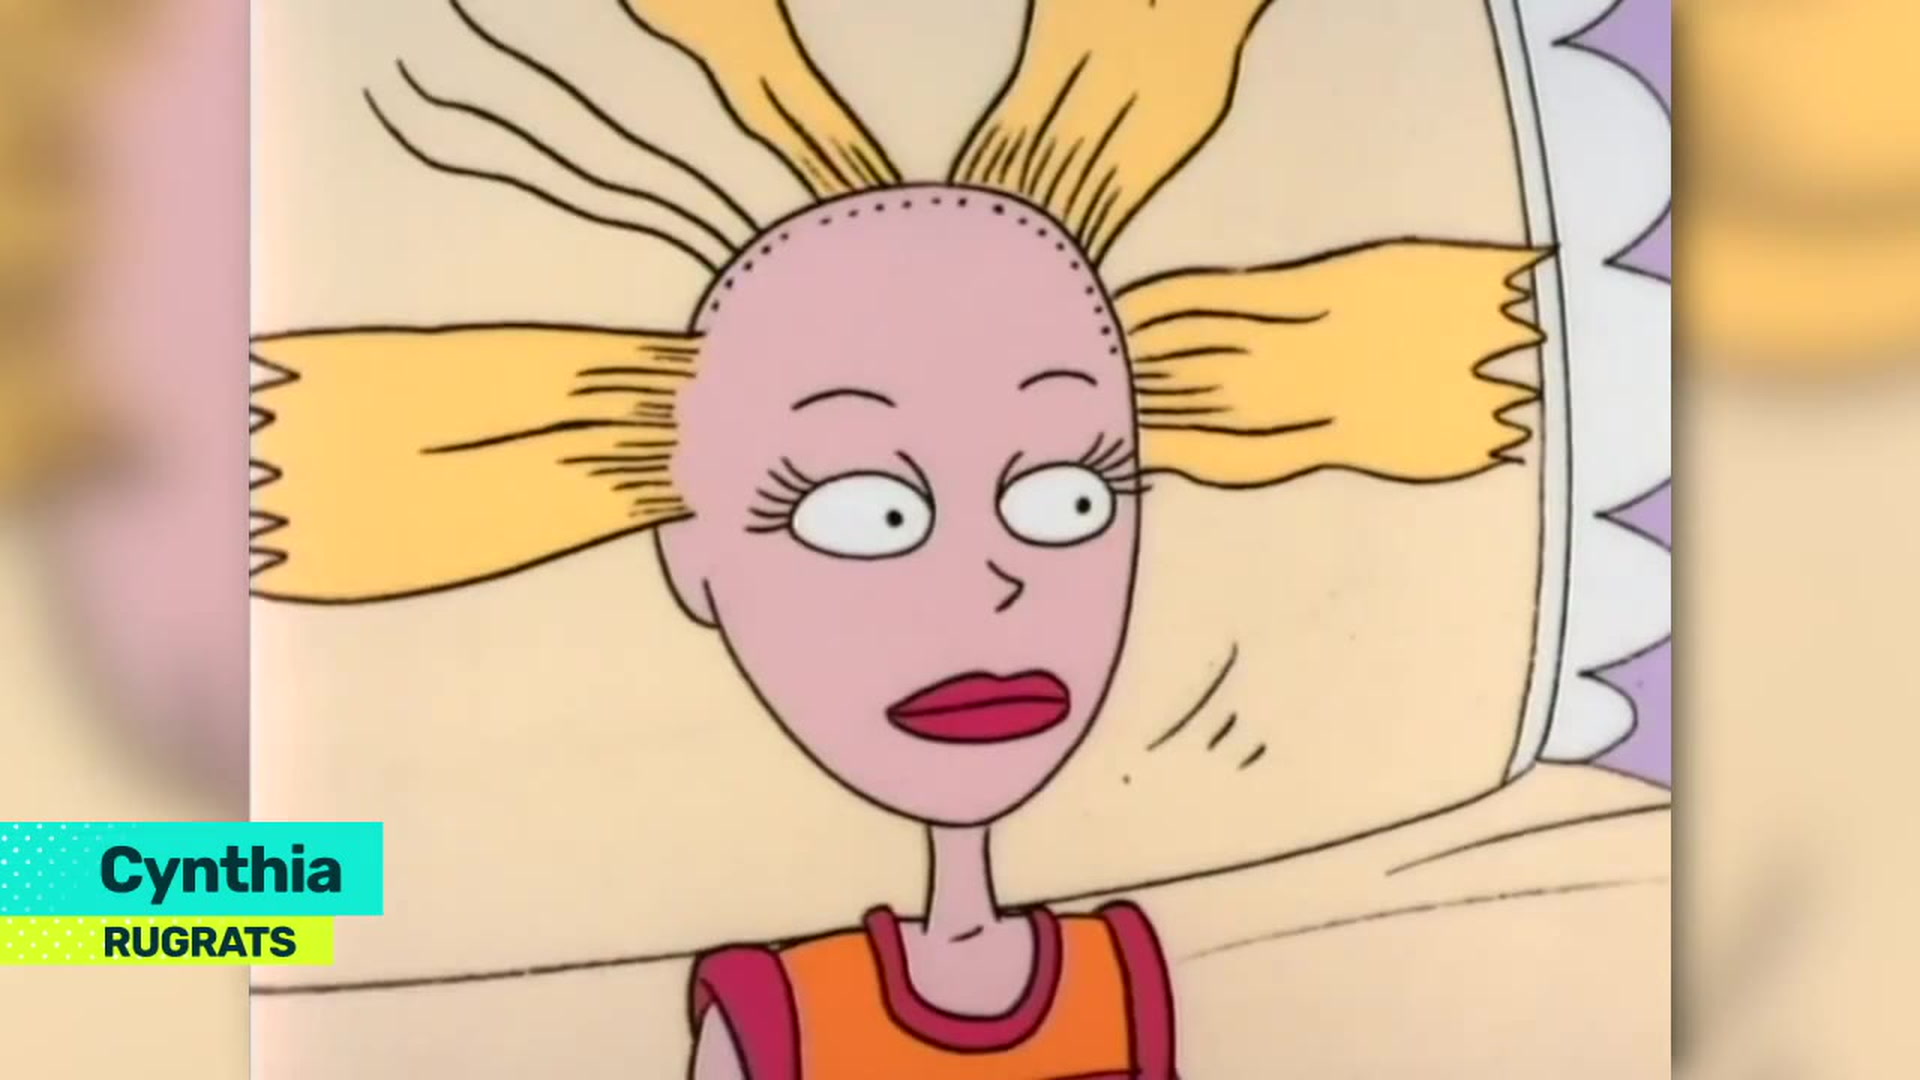 Cynthia Rugrats - Cynthia is the beloved doll of the character Angelica Charlotte Pickles, the main antagonist of the animated series Rugrats.